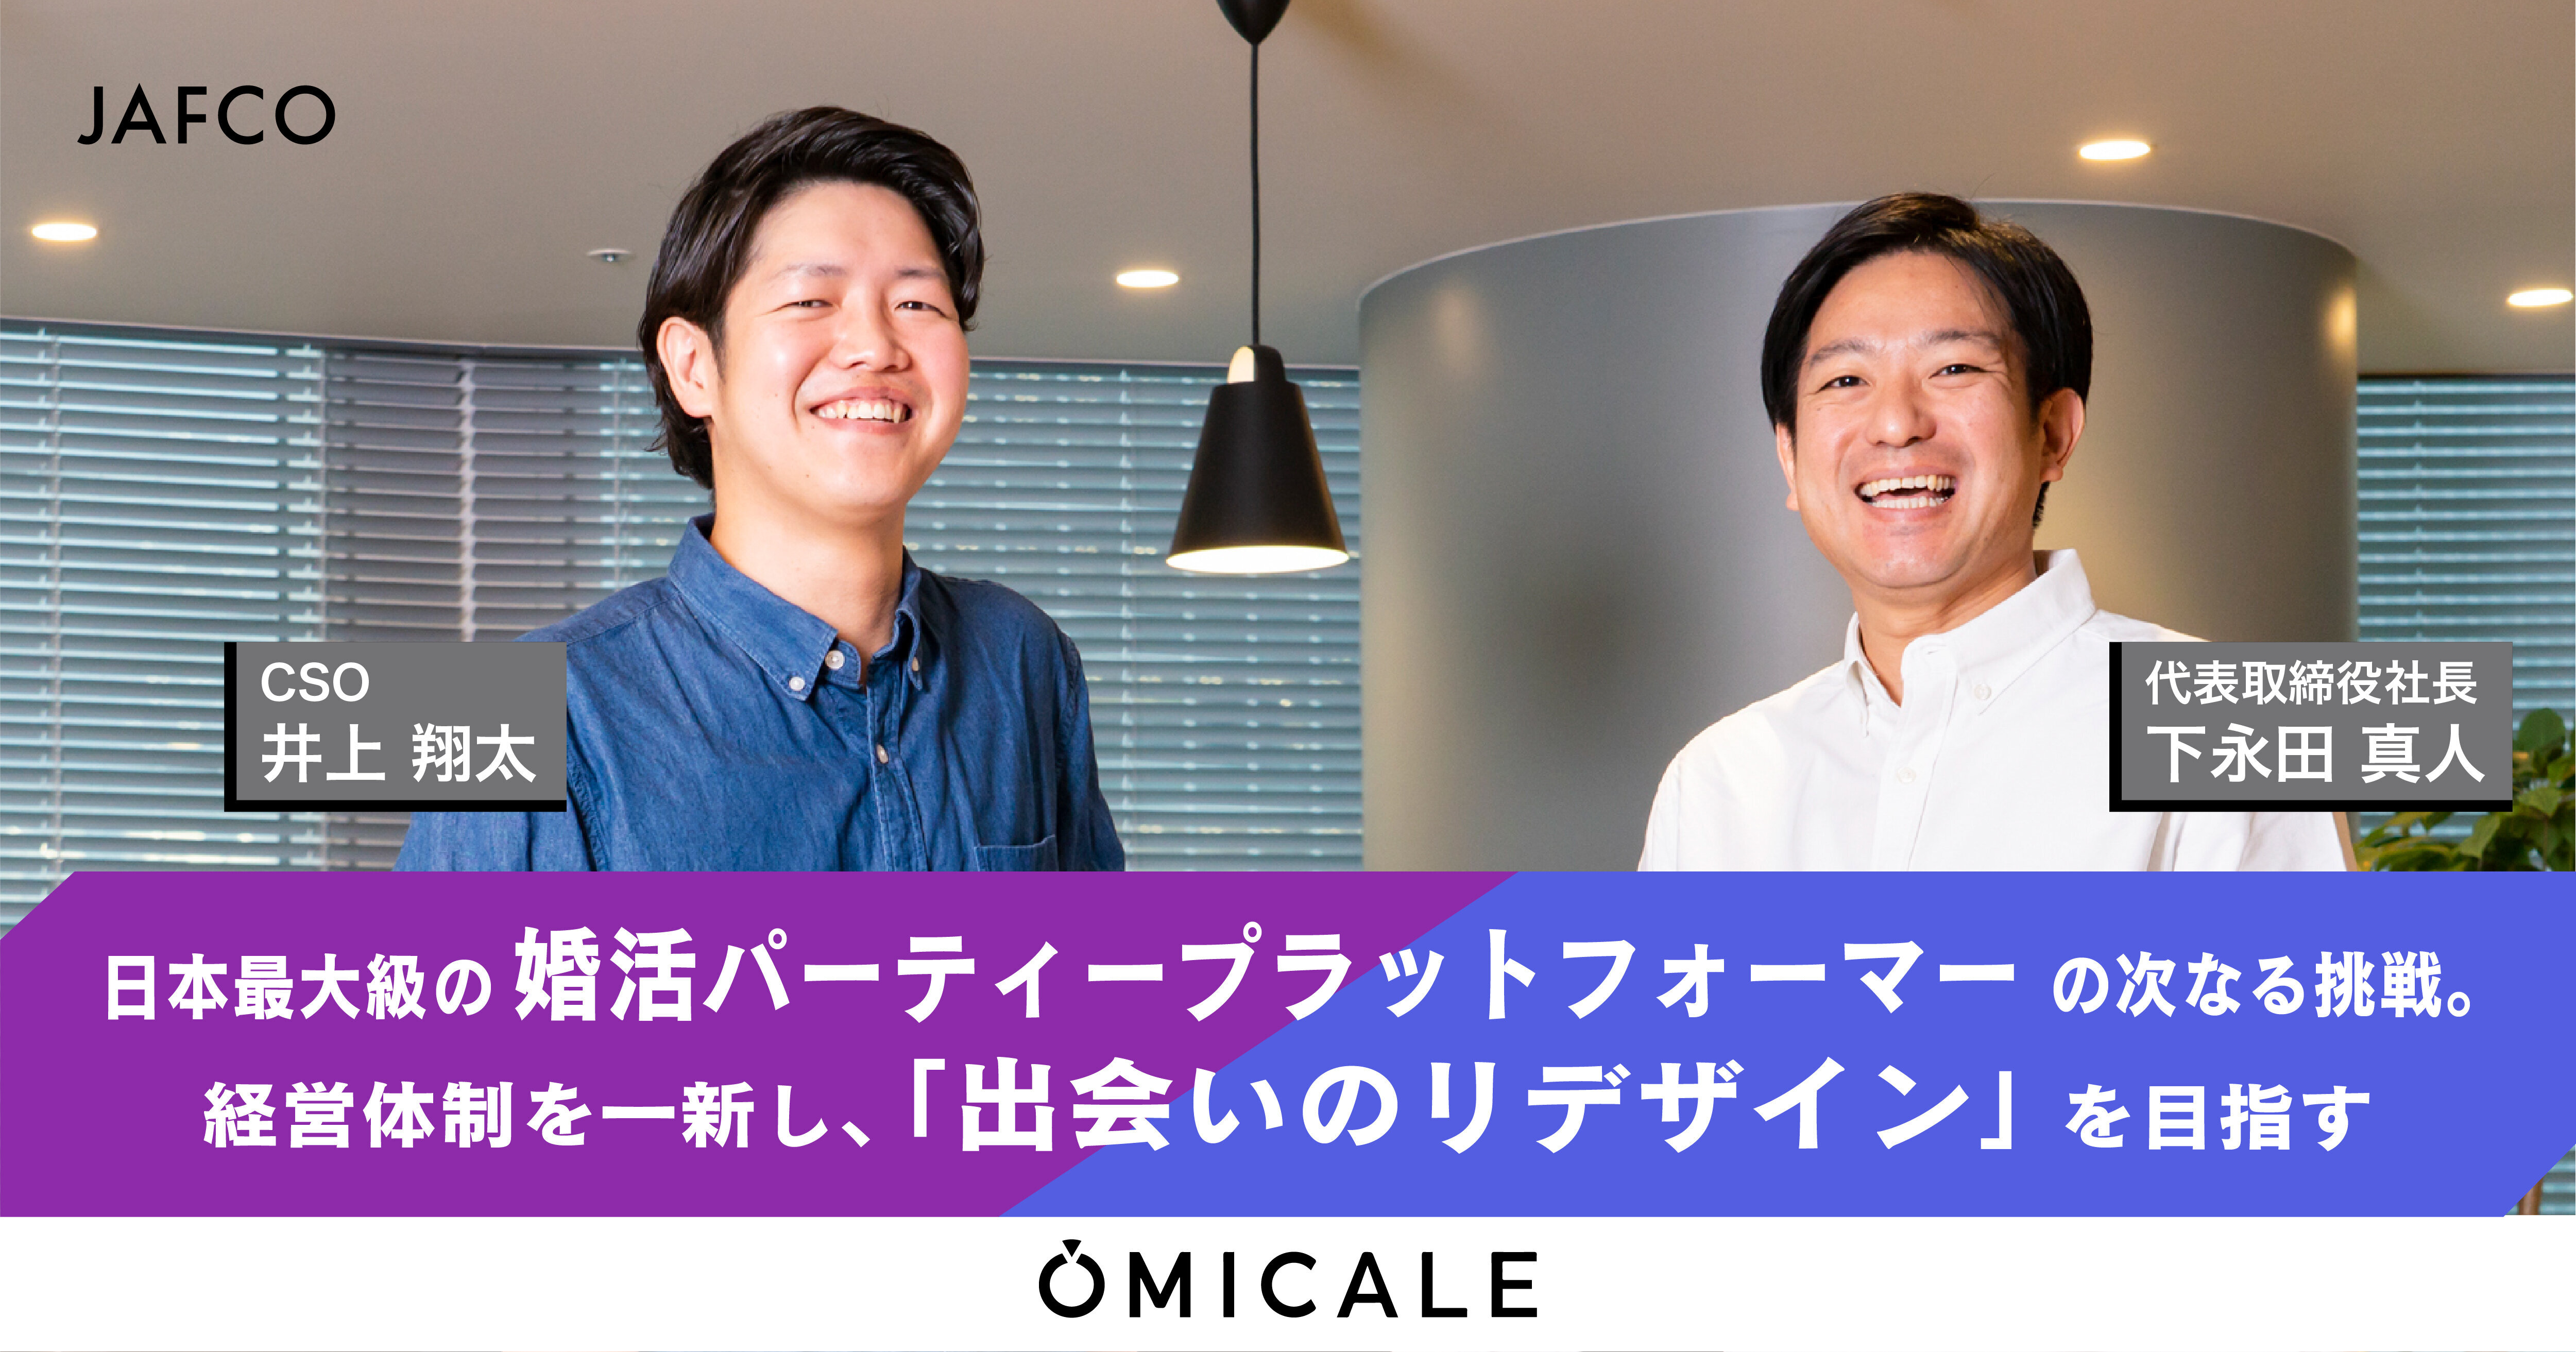 Redesigning the Way People Meet: Japan's Leading Matchmaking Platform Revamps and Embarks on New Journey